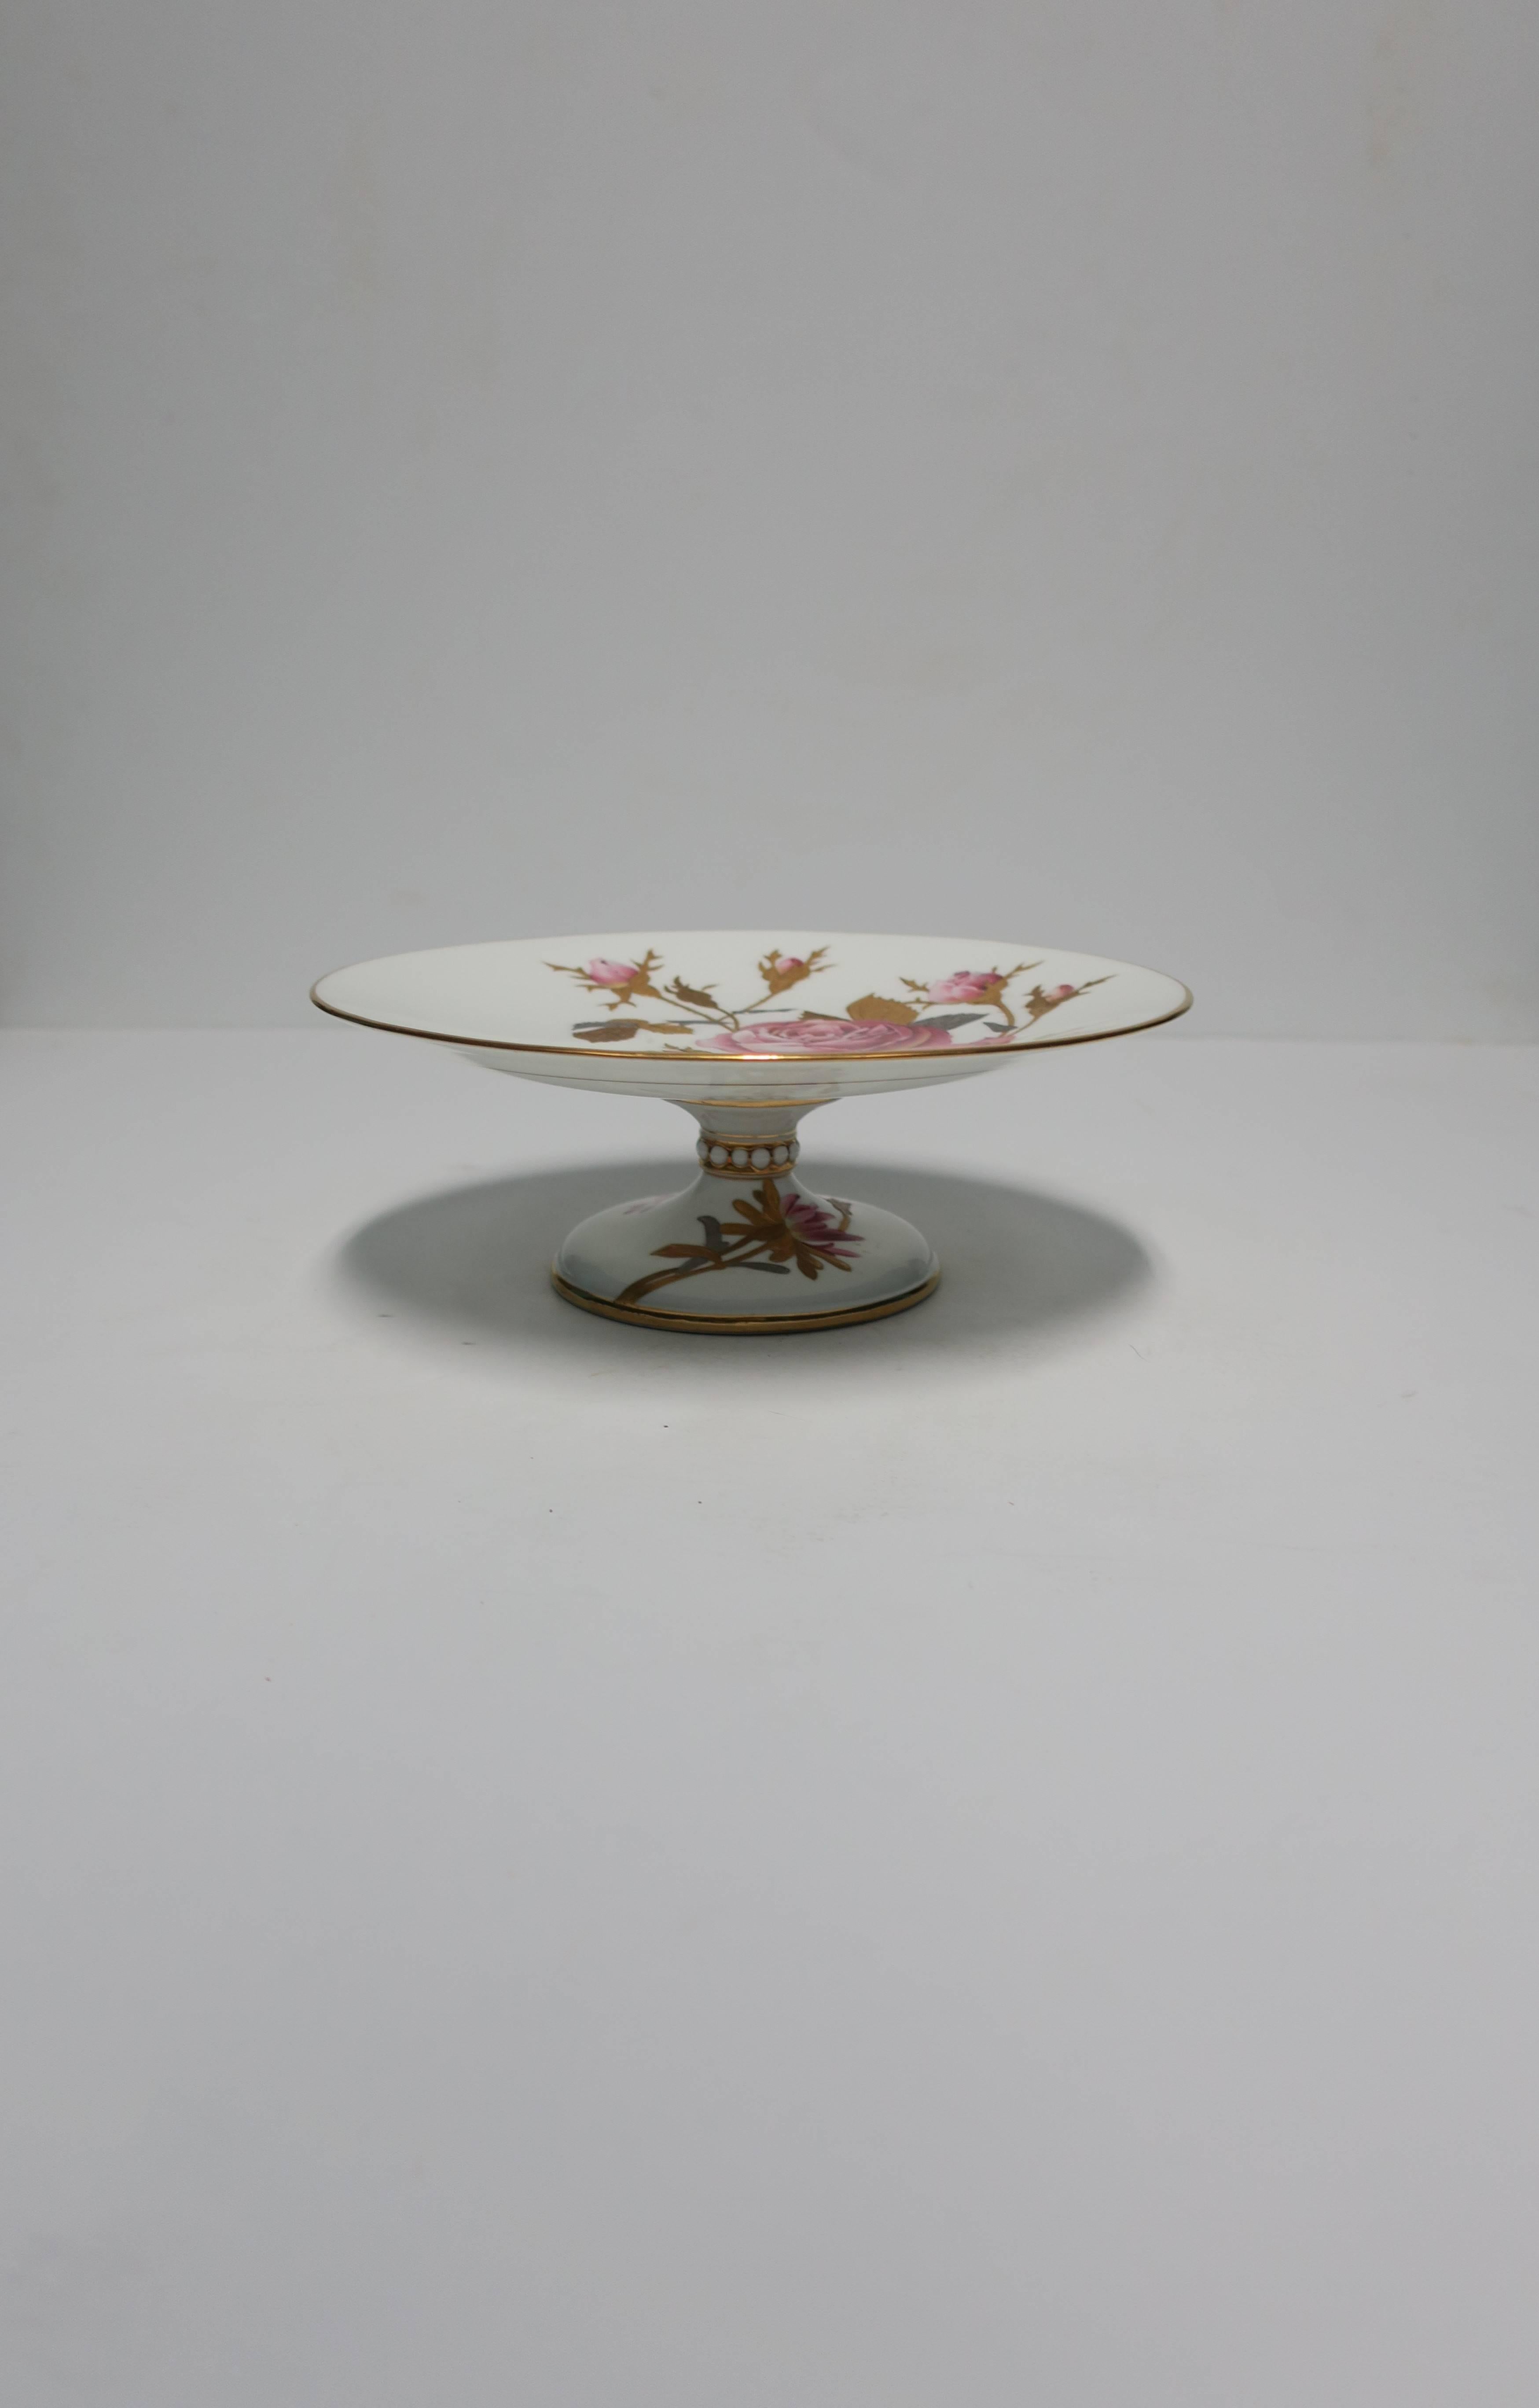 Gilt European White Porcelain Pedestal Dessert Plate with Pink Roses and Gold Leaves For Sale